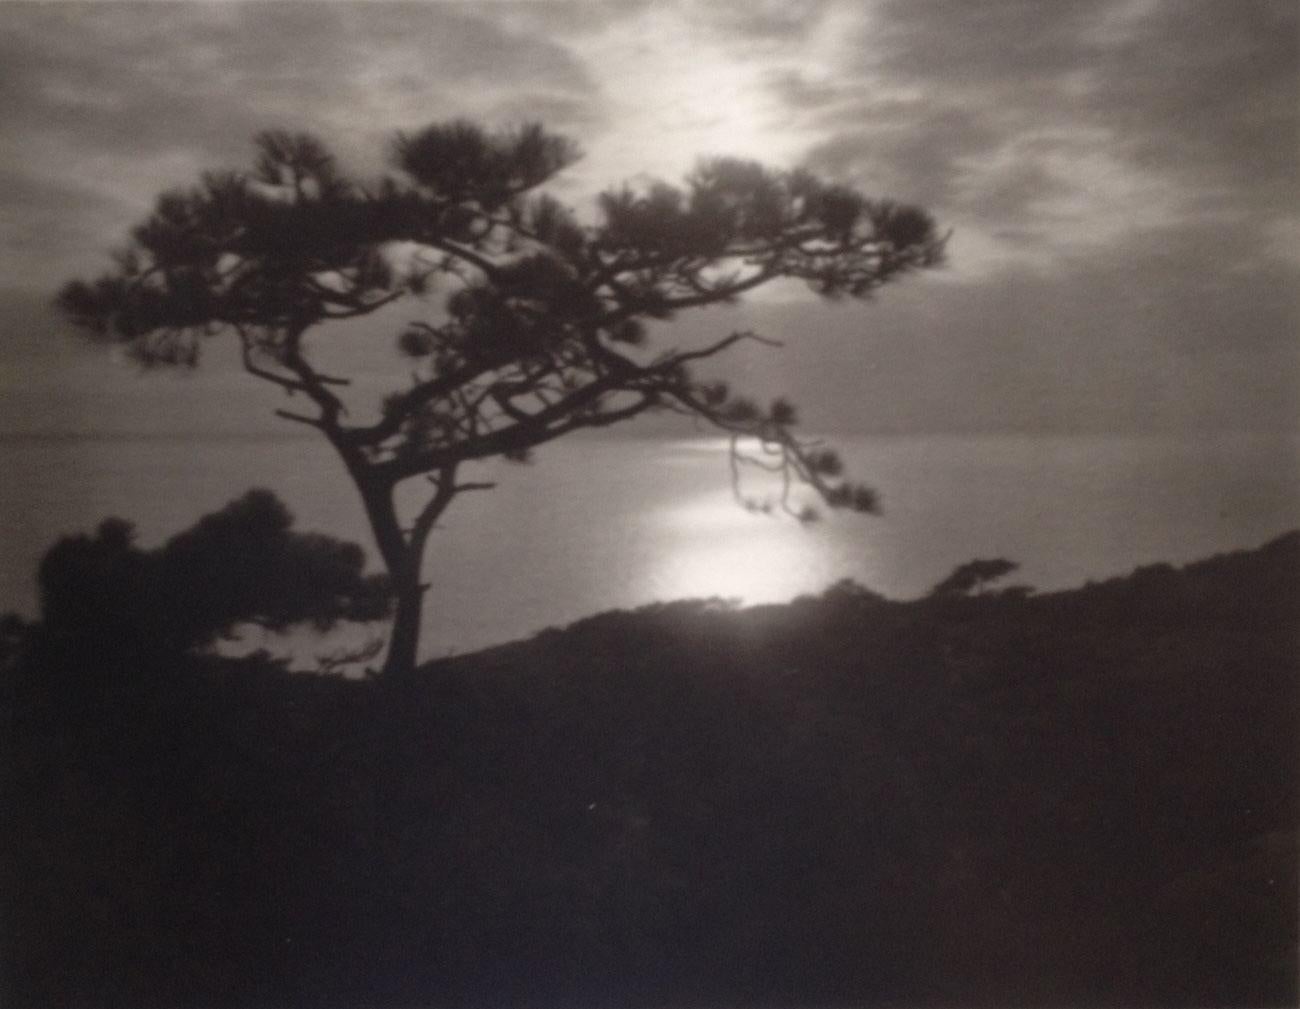 Leopold Hugo  Black and White Photograph - Cliffside Tree